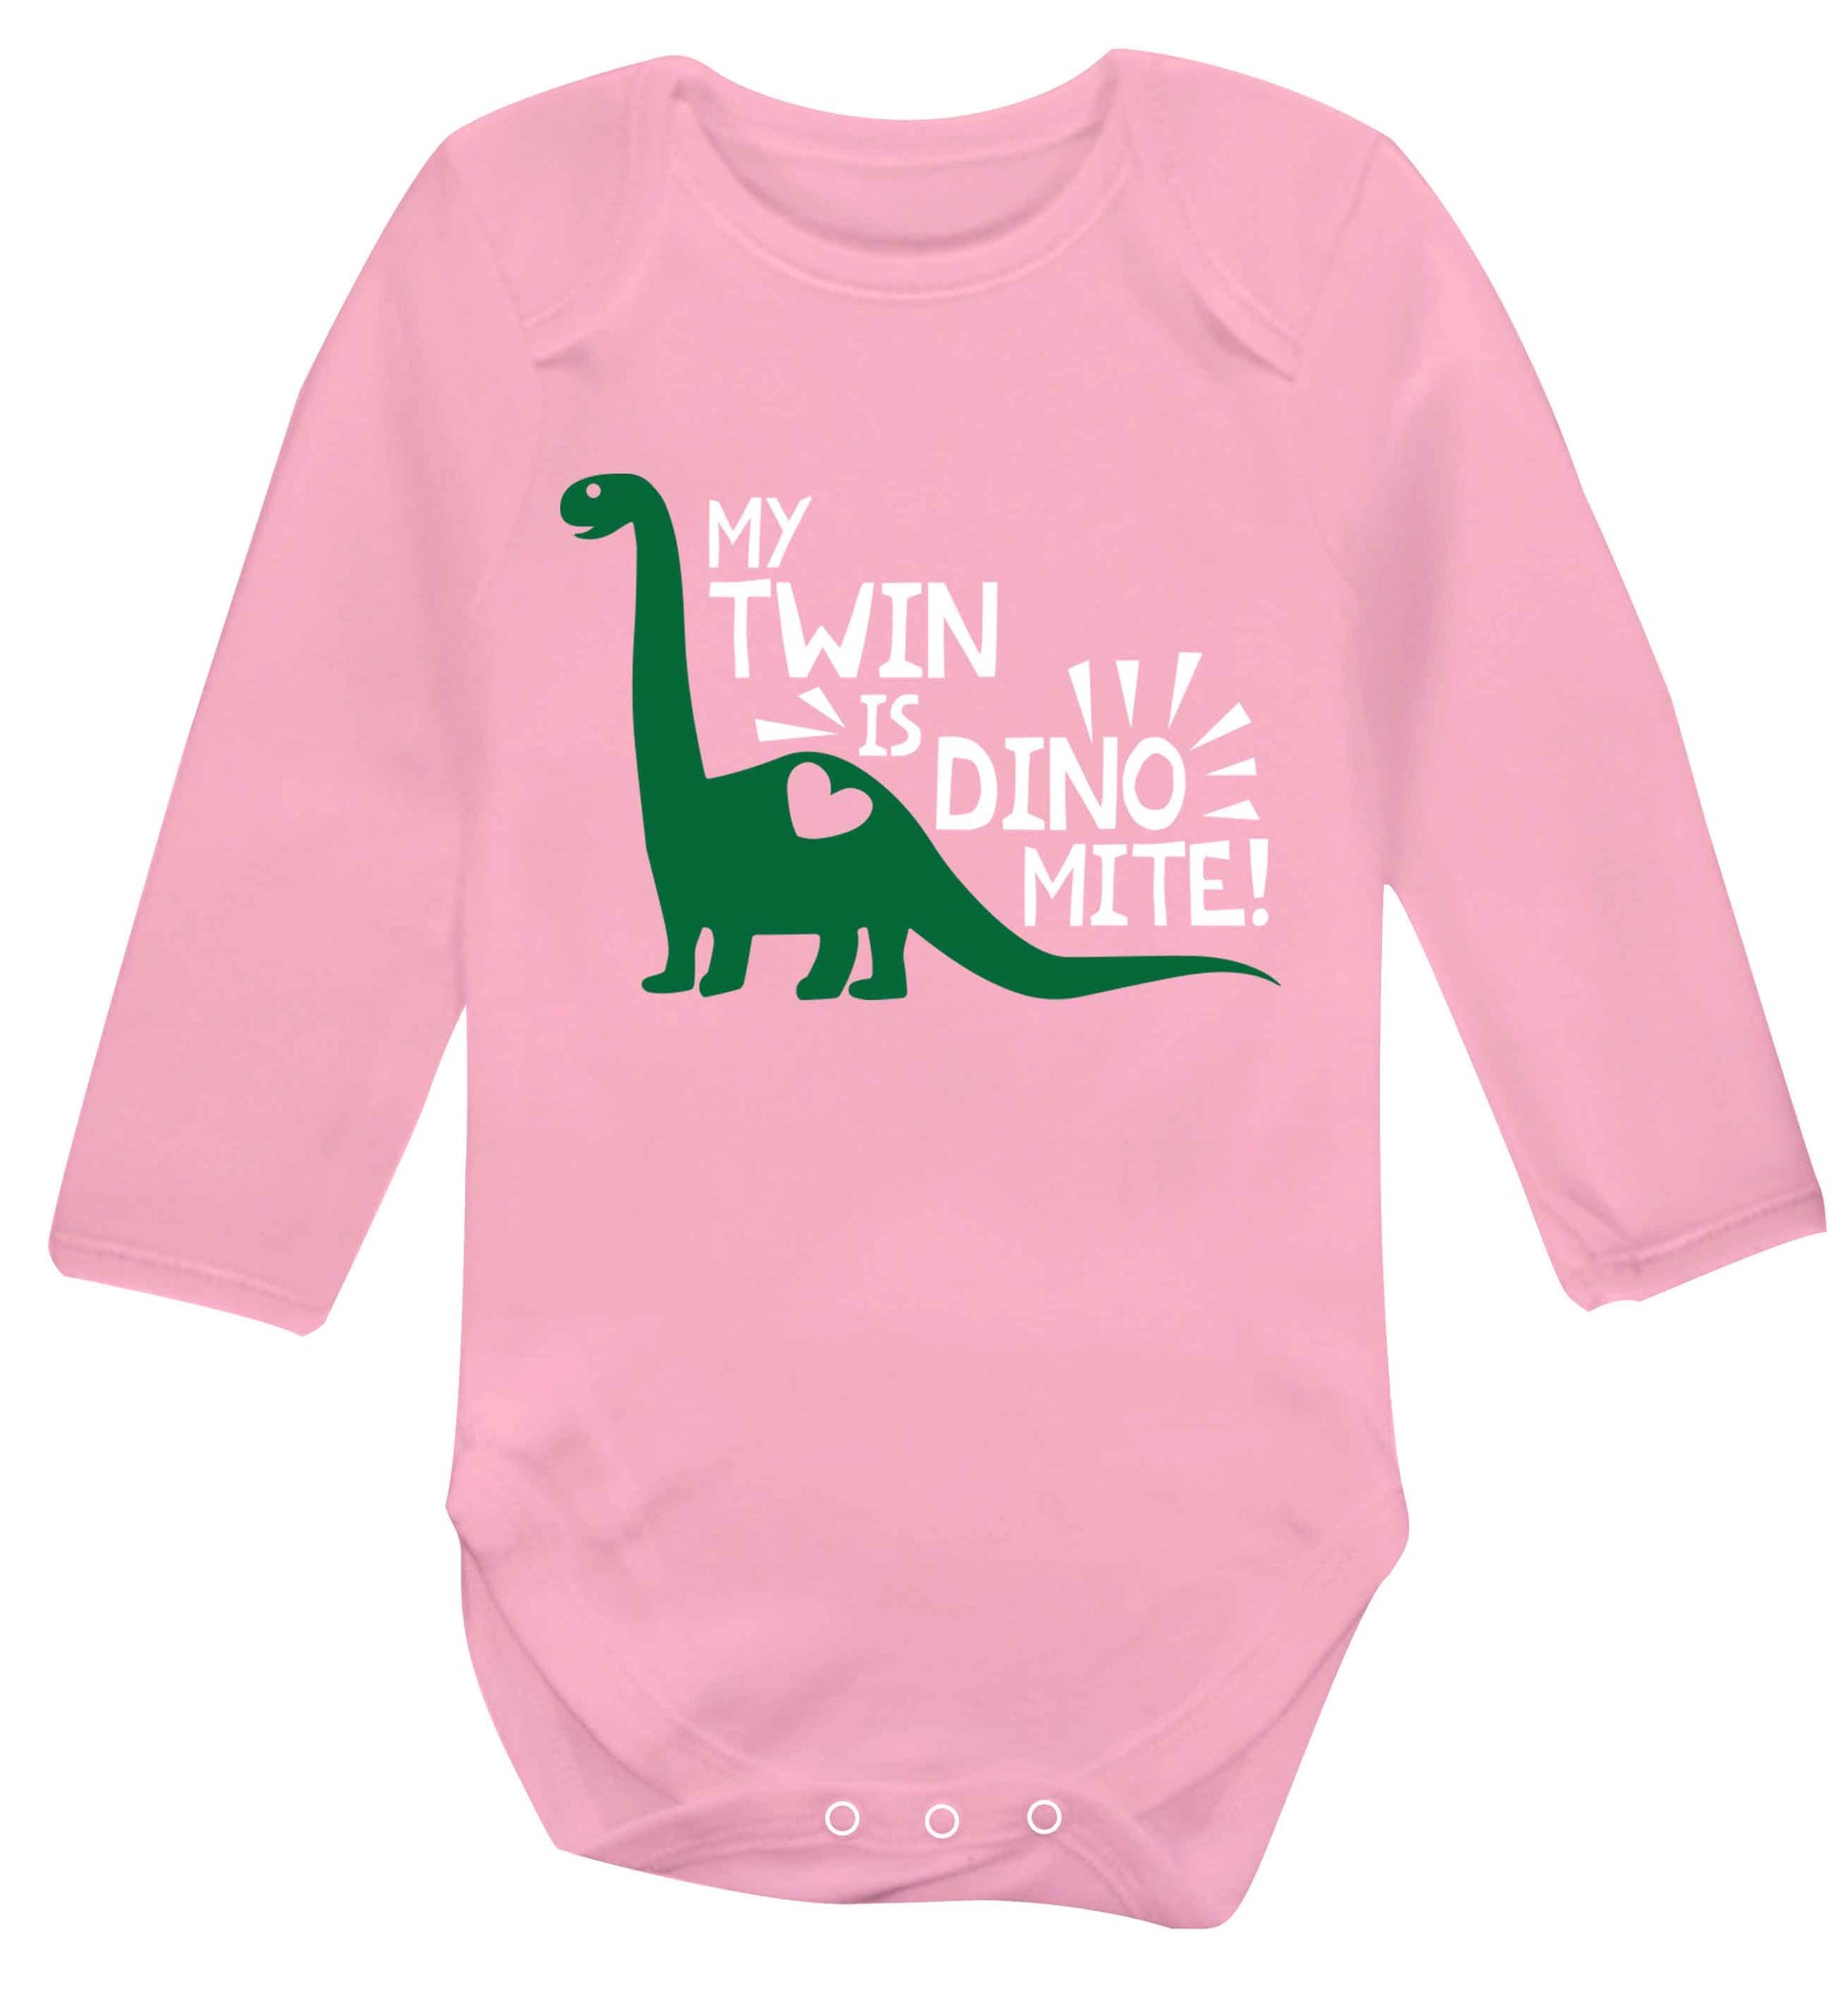 My twin is dinomite! Baby Vest long sleeved pale pink 6-12 months